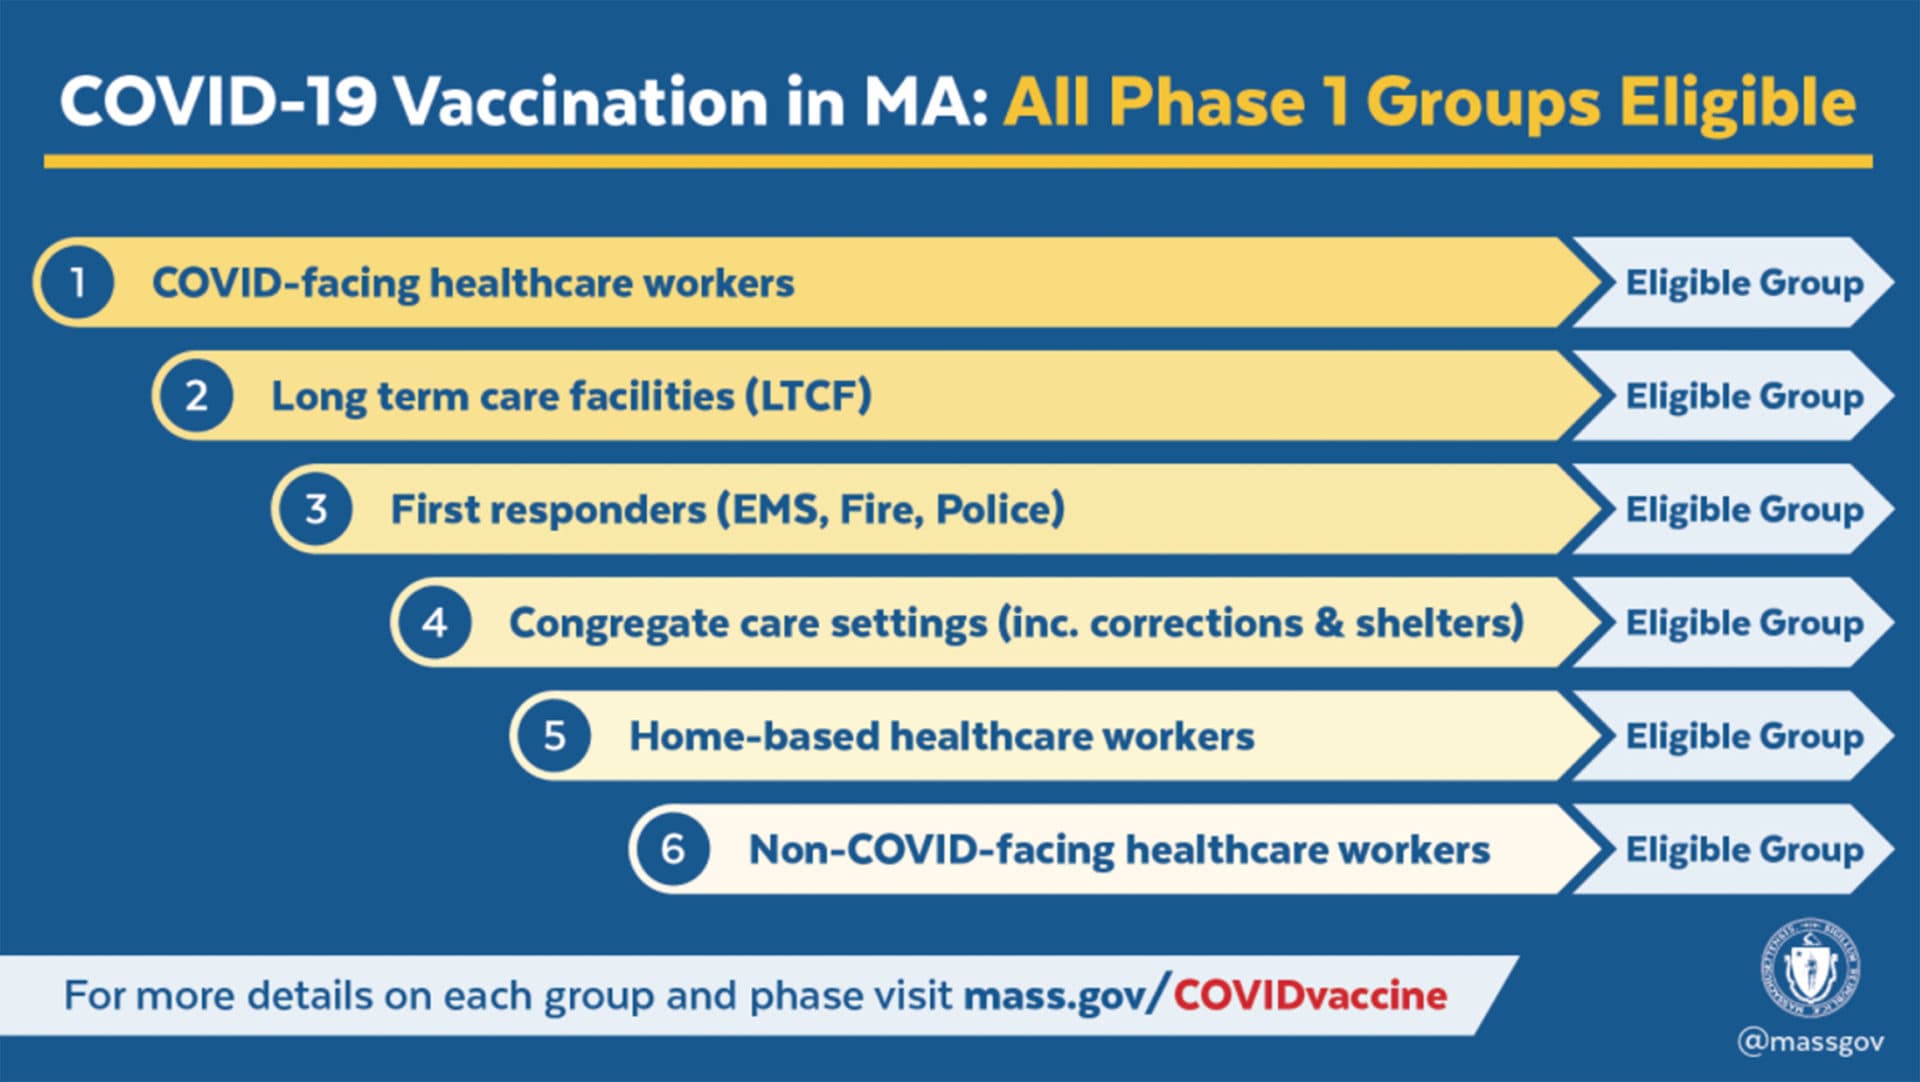 Details on phase one priority groups. (Courtesy Mass.gov)